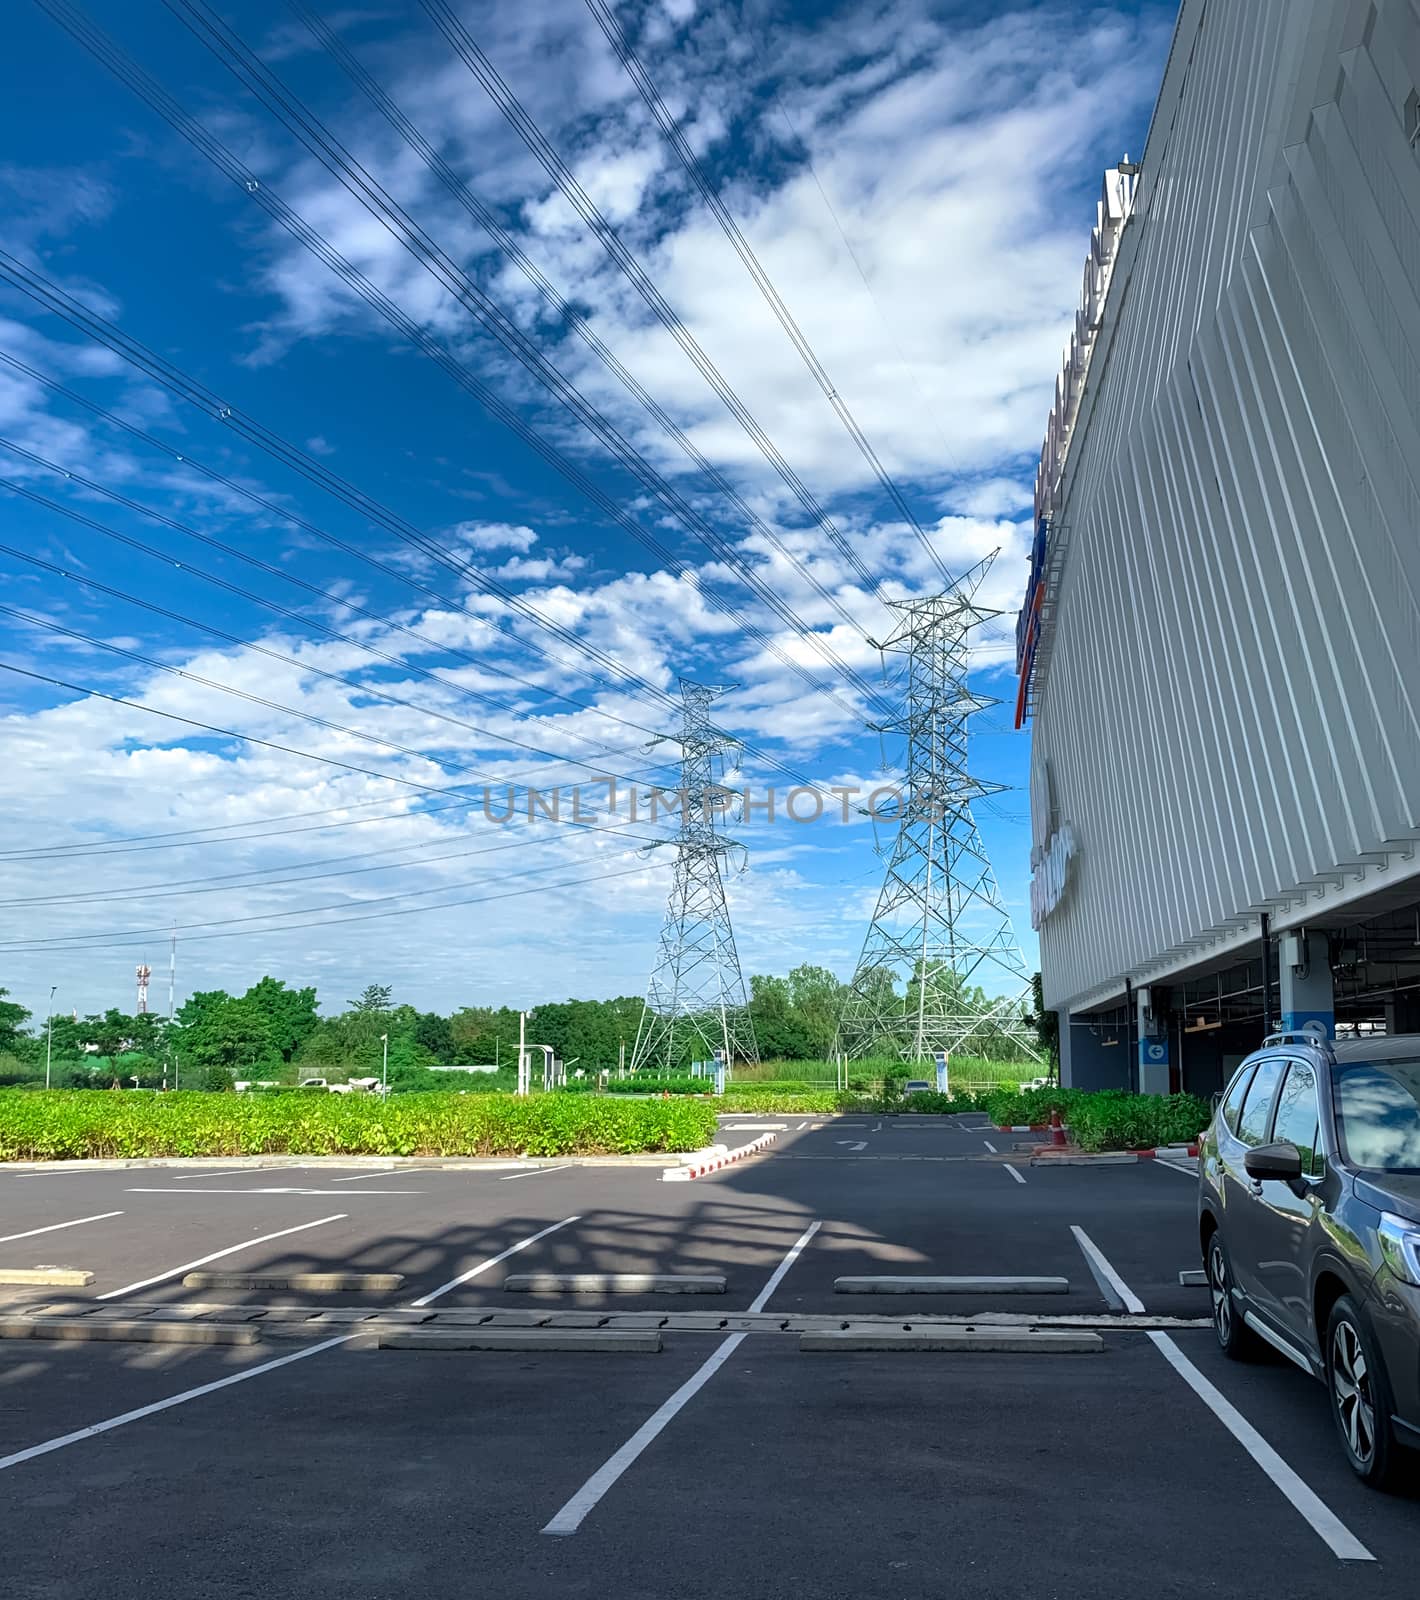 Car parking space at shopping mall for customer service. Outdoors asphalt car parking lot on sunny day with green tree forest and high voltage electric tower. Overhead transmission line. 